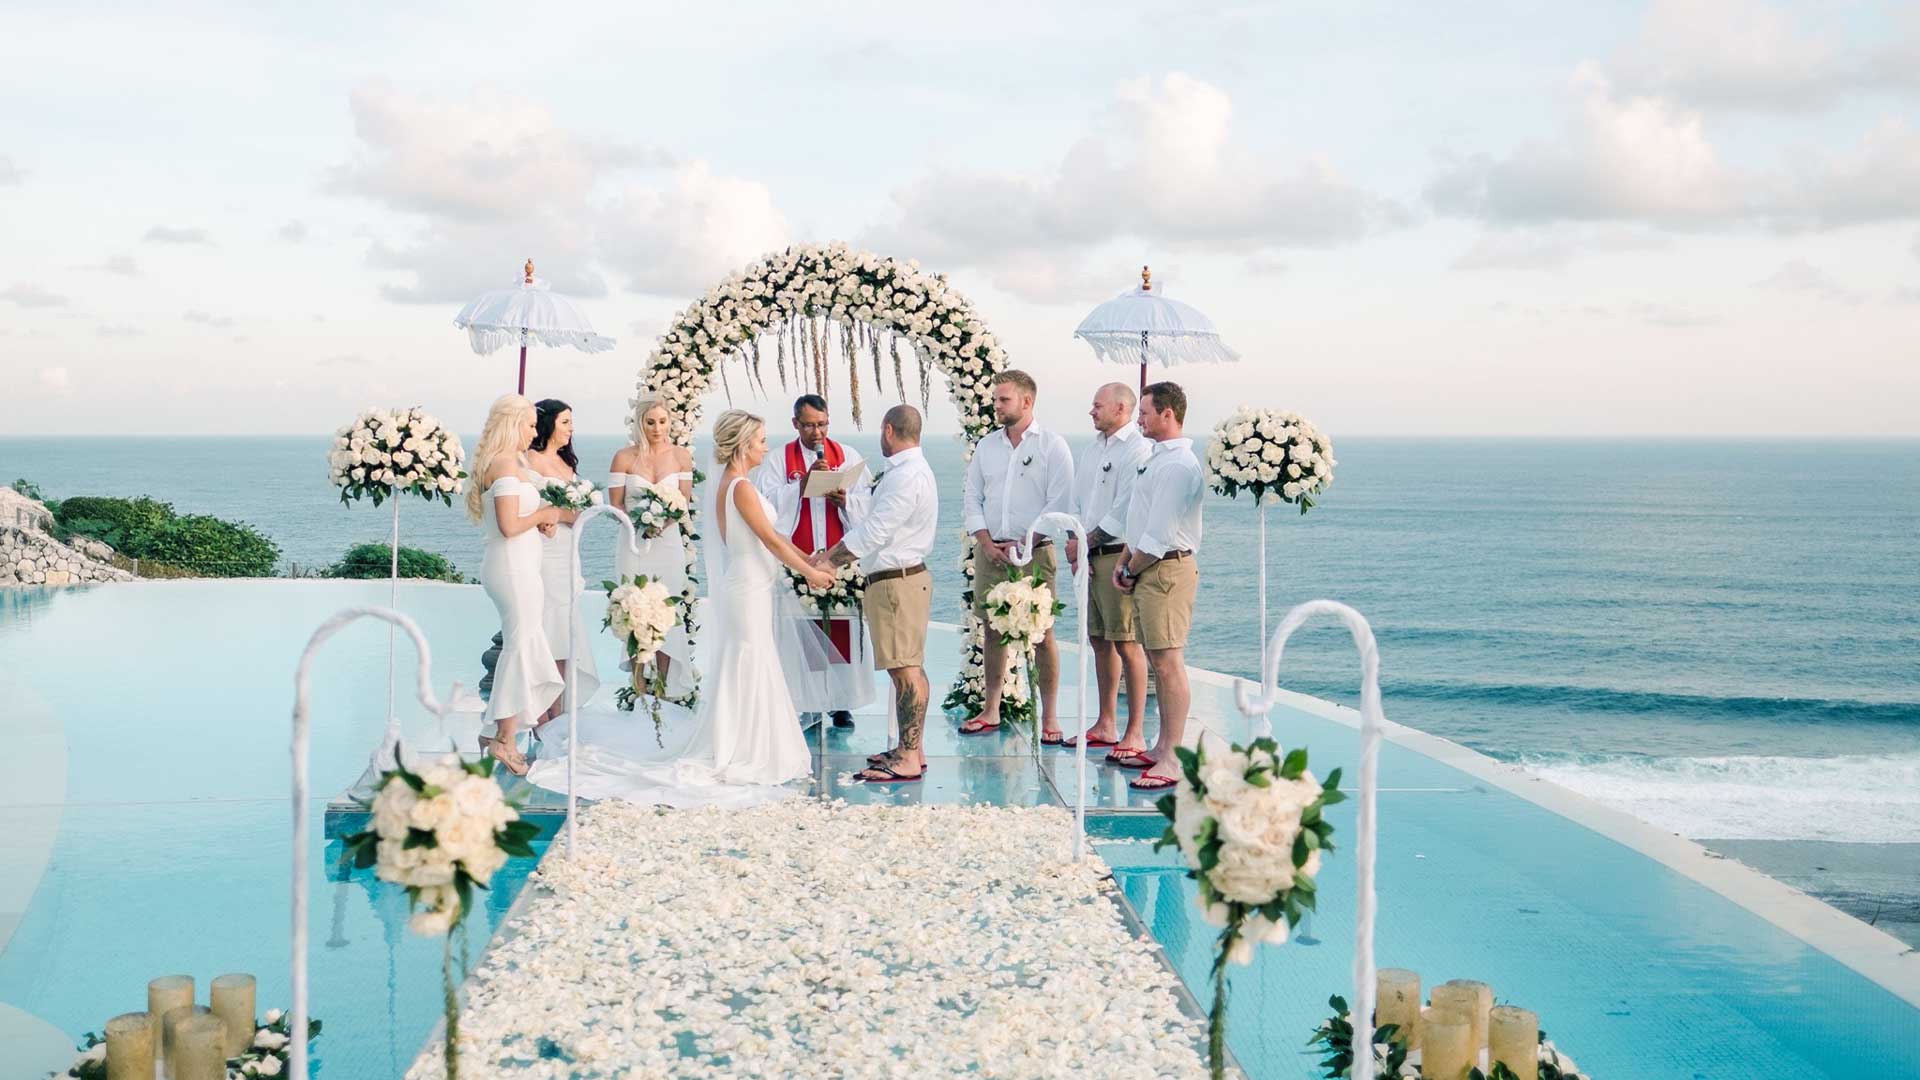 18 Breathtaking Wedding Venues in Bali for Your Big Day